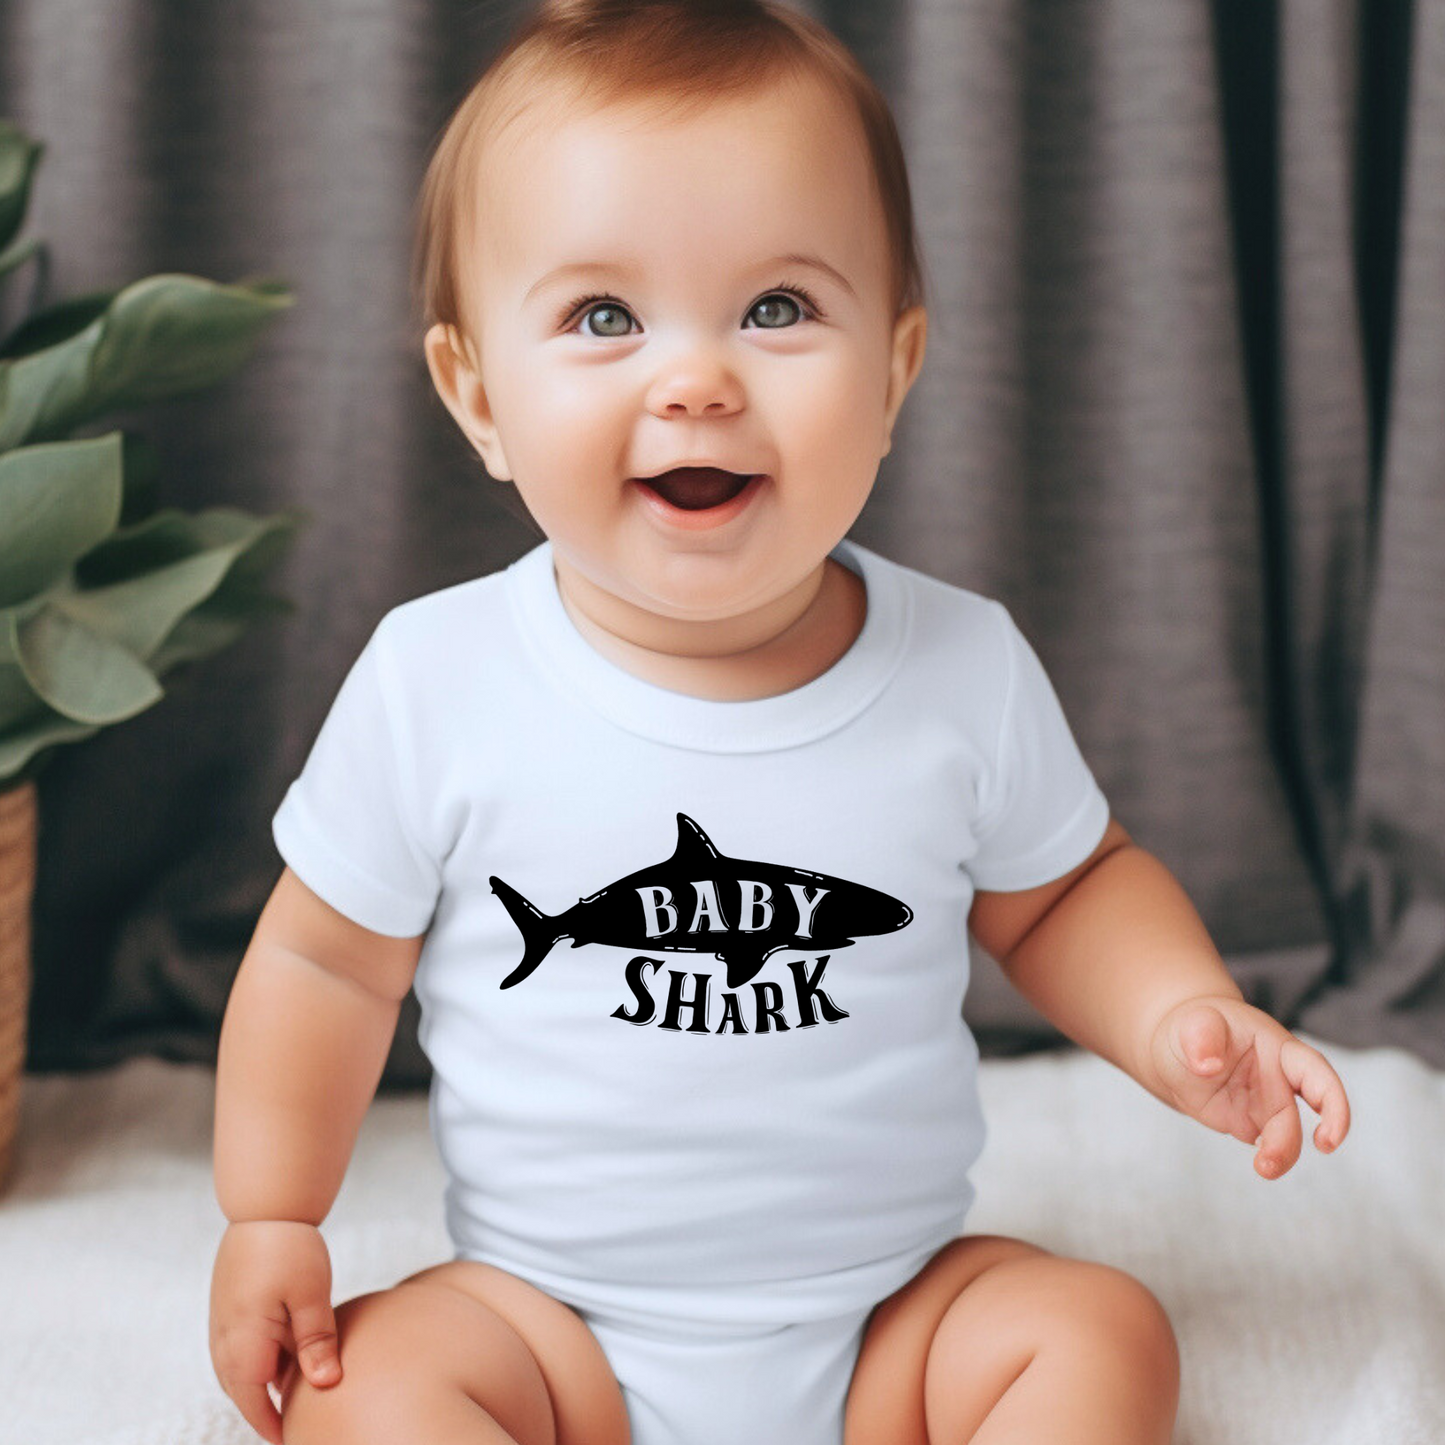 Baby Shark T-Shirts for Dad and Baby: Father and Baby Matching Outfits